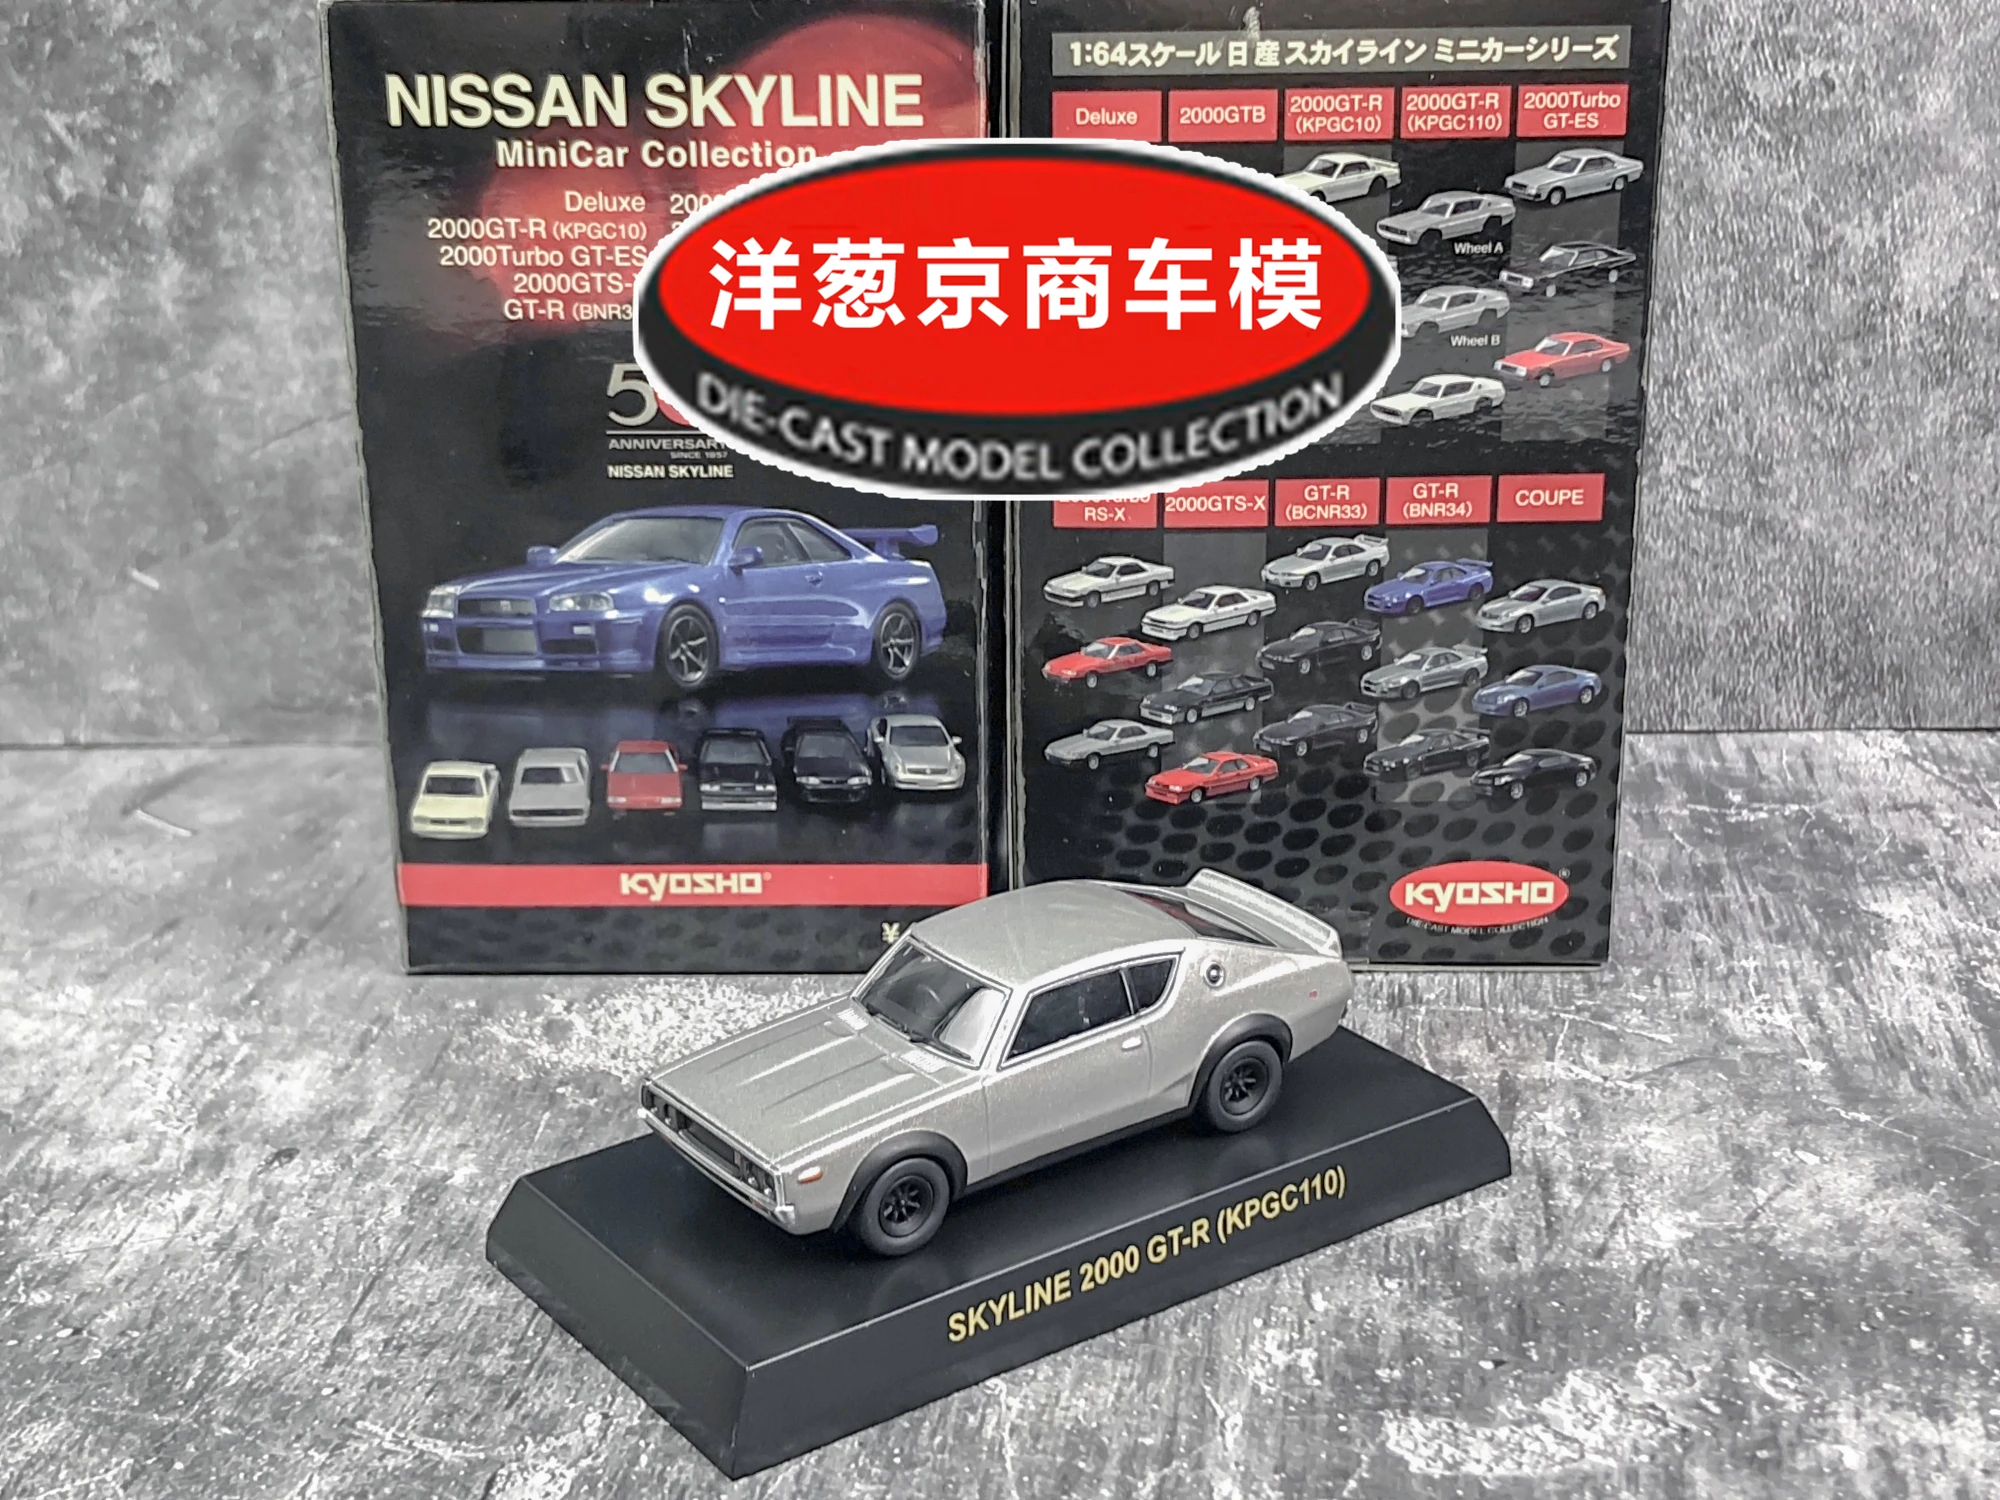 

kyosho Nissan 1:64 Skyline 2000 GT-R KPGC110 Metal Die-cast Model Collection Car Toy